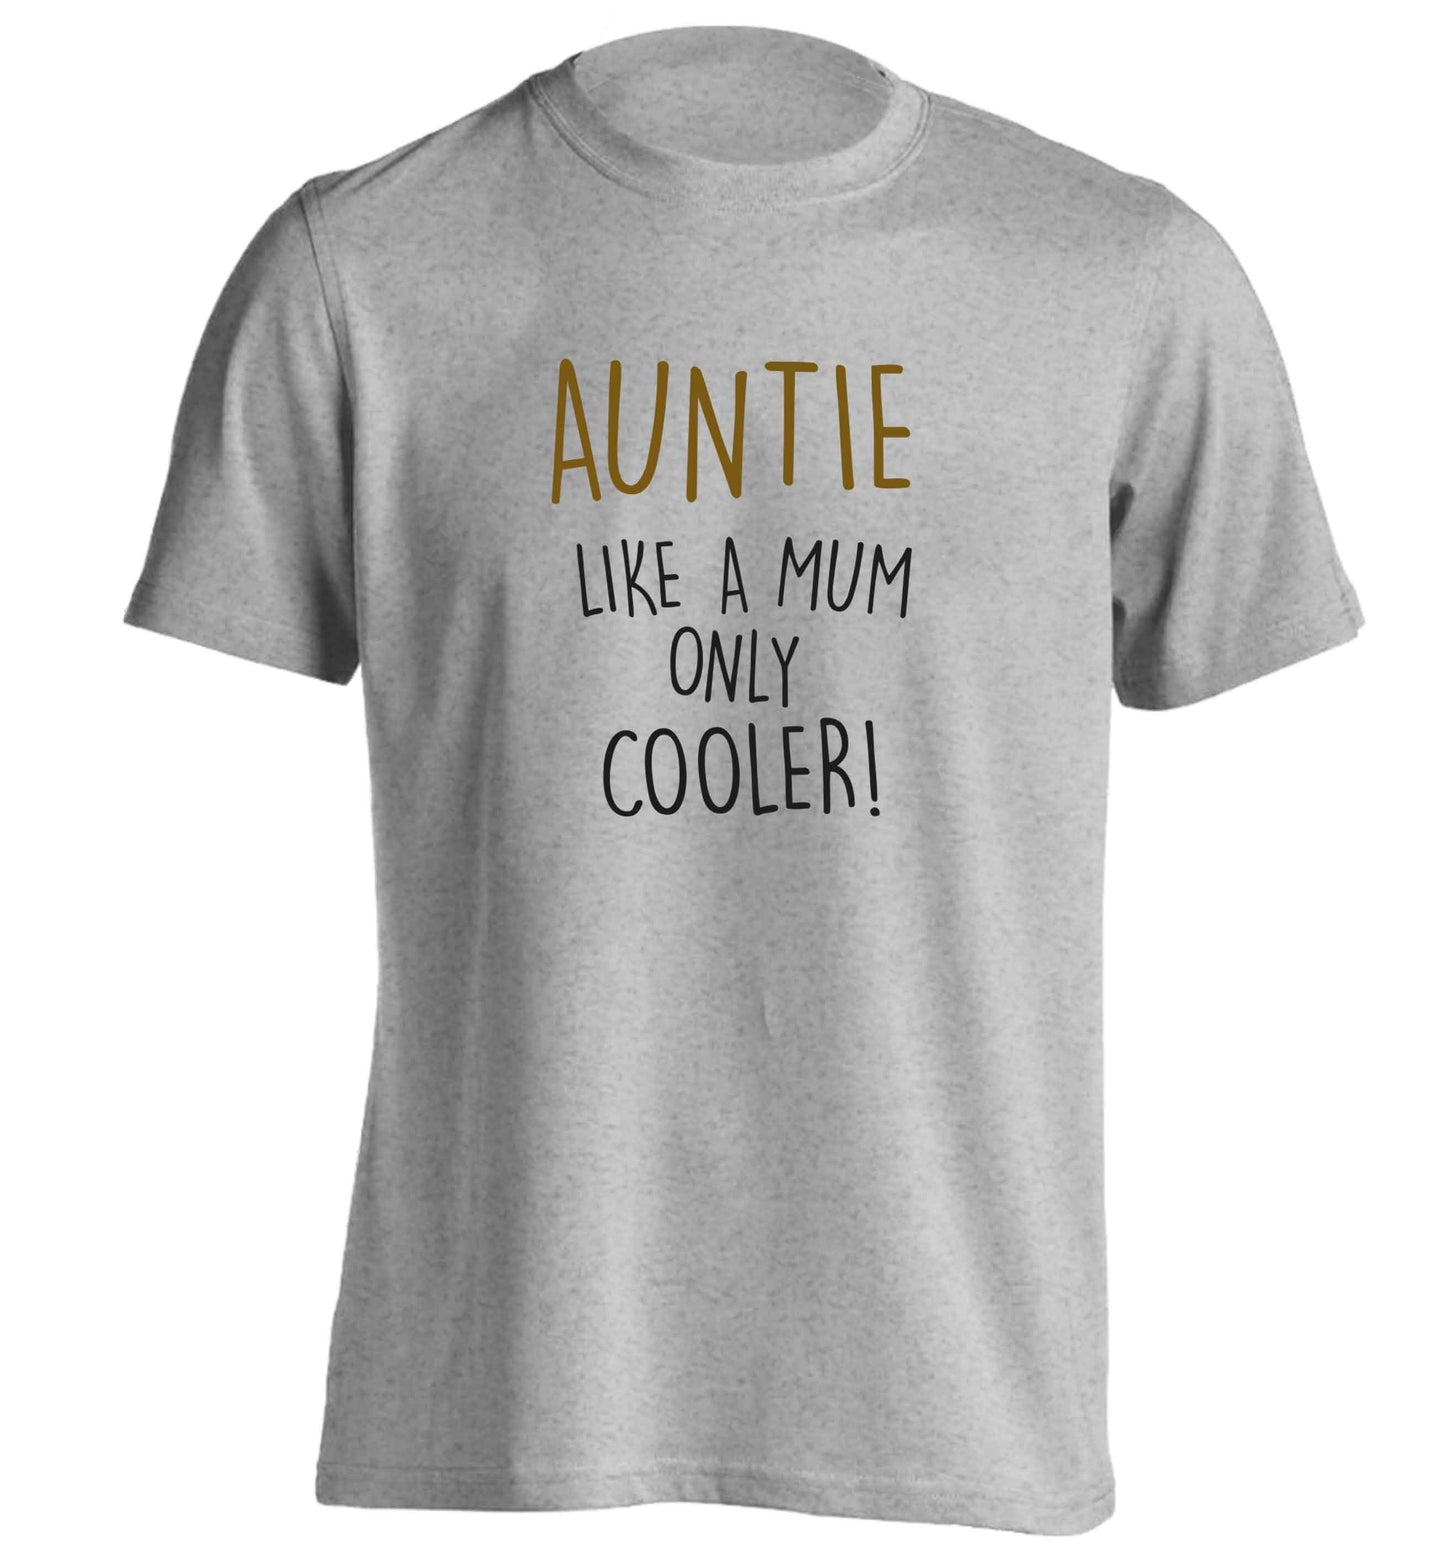 Auntie like a mum only cooler adults unisex grey Tshirt 2XL